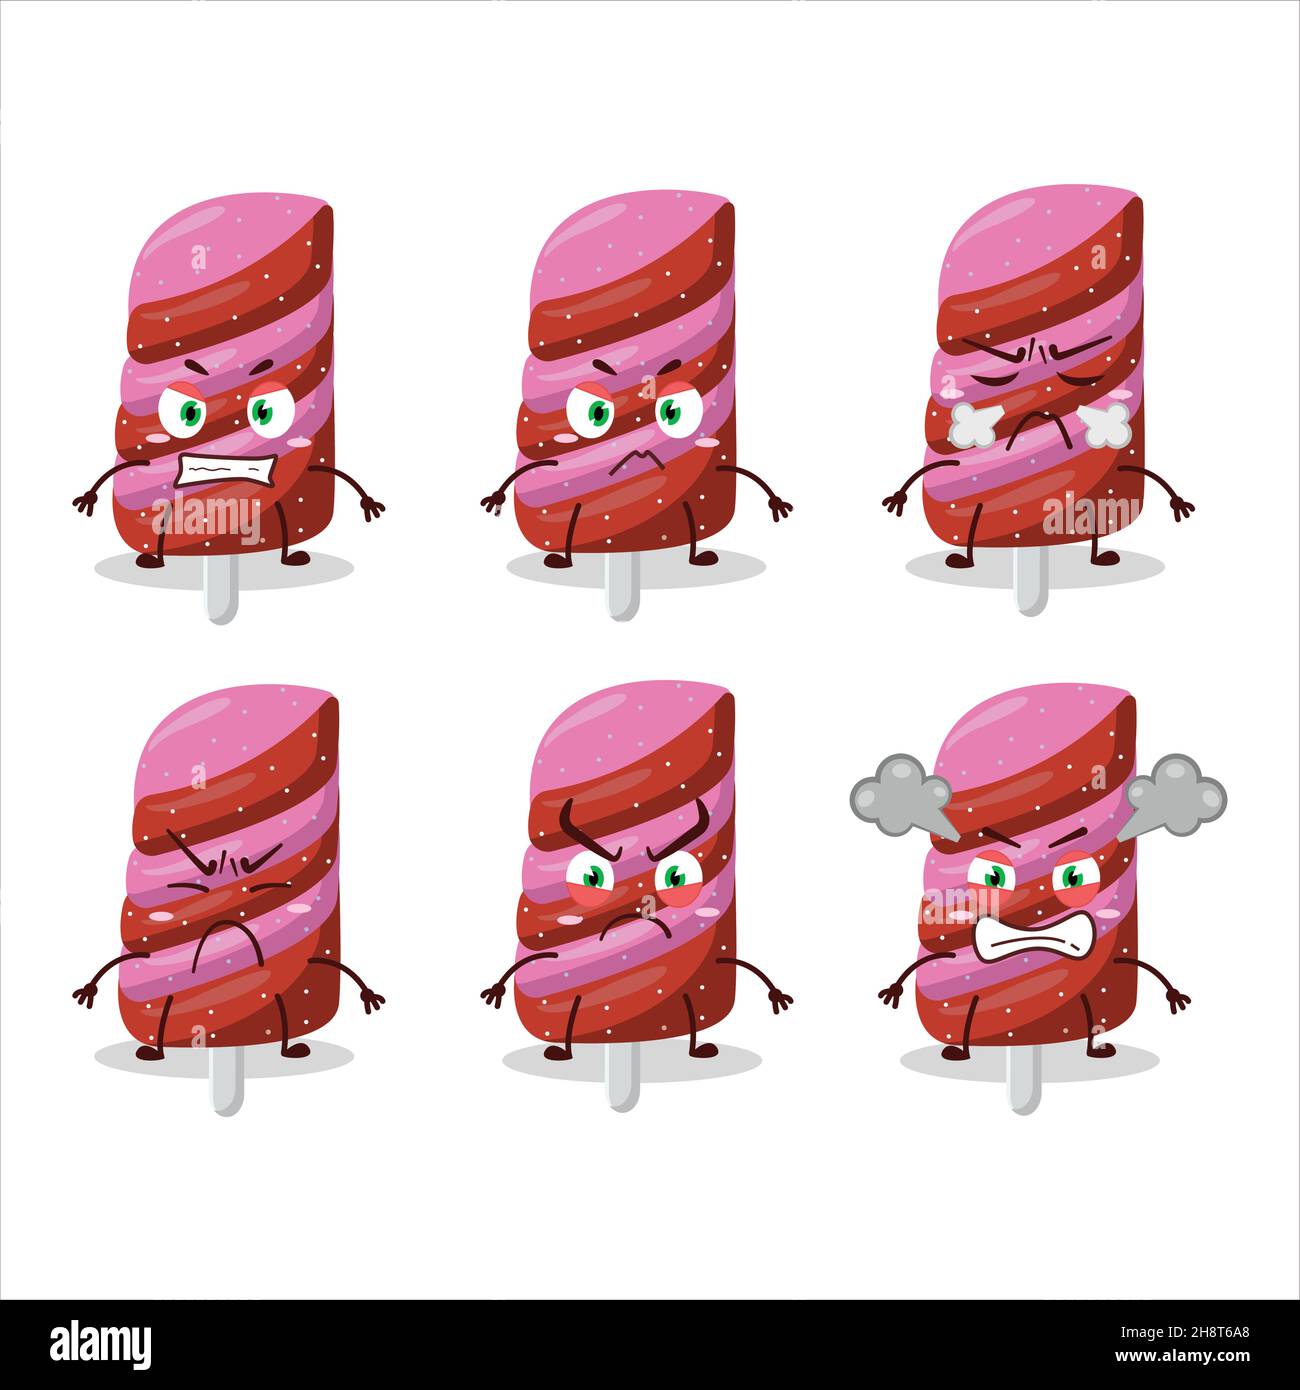 Gummy candy strawberry cartoon character with various angry expressions. Vector illustration Stock Vector